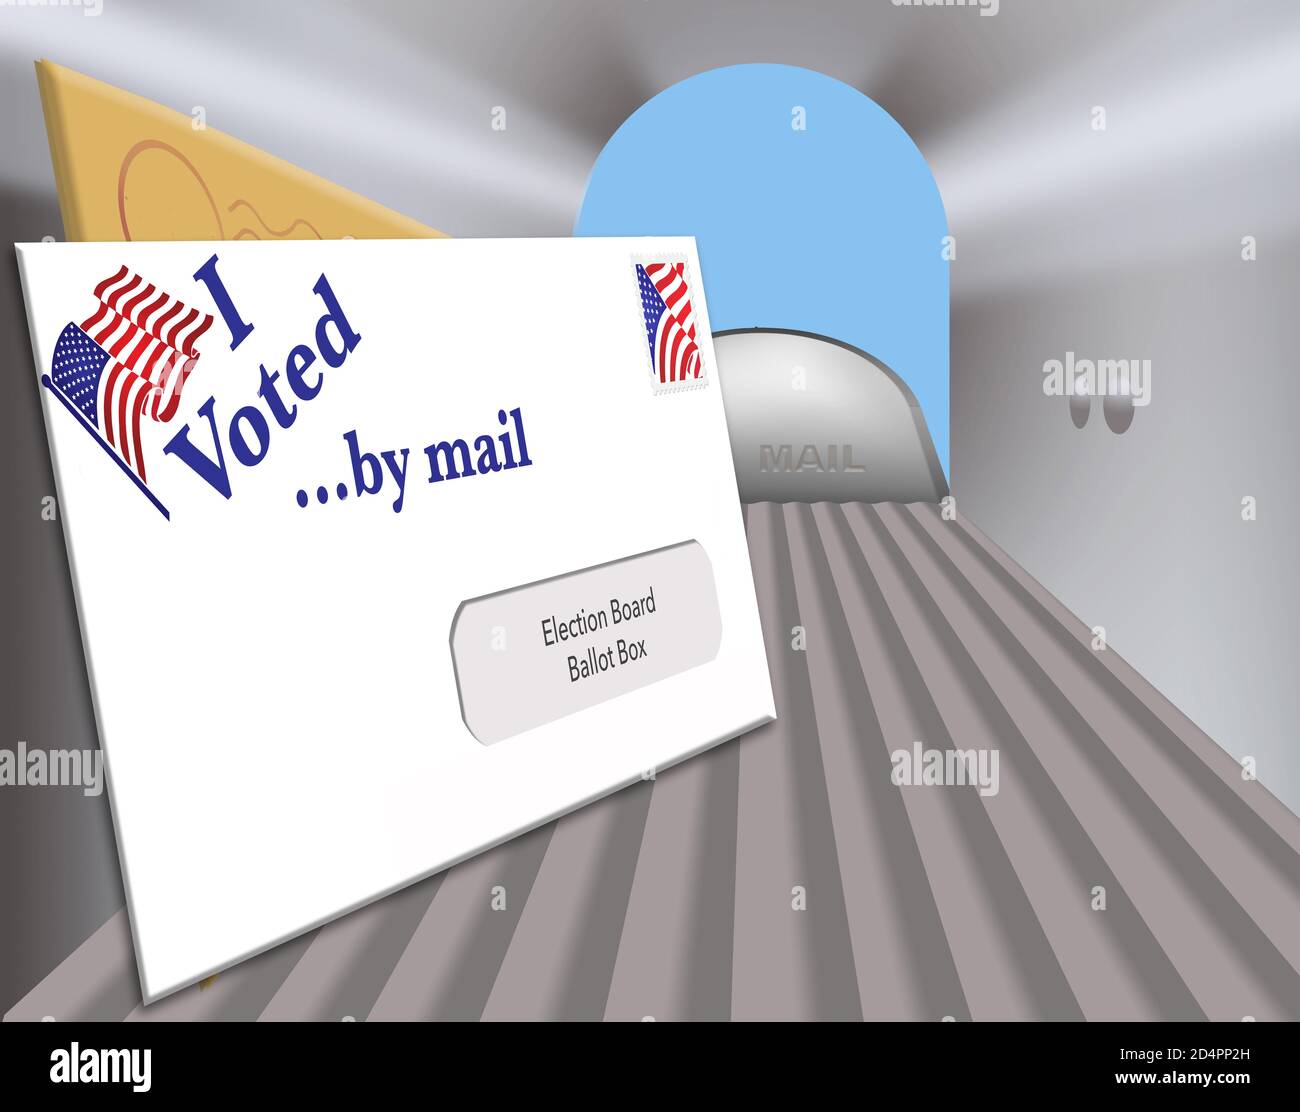 A election ballot envelope in a mailbox is ready to be mailed and includes the words: “I Voted by mail”. Stock Photo